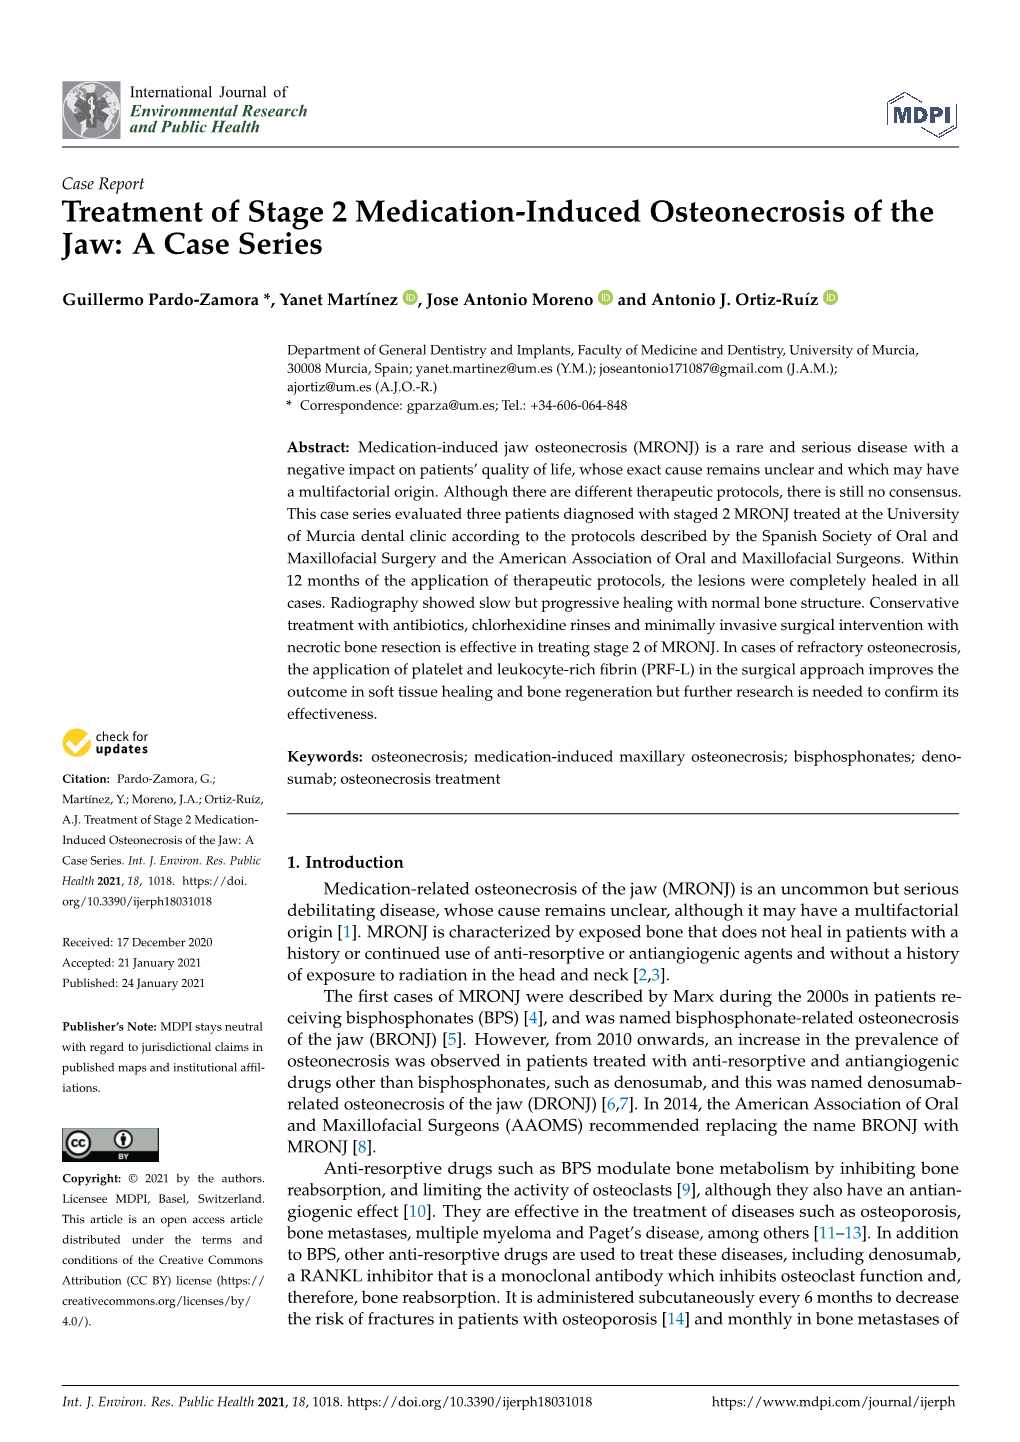 Treatment of Stage 2 Medication-Induced Osteonecrosis of the Jaw: a Case Series